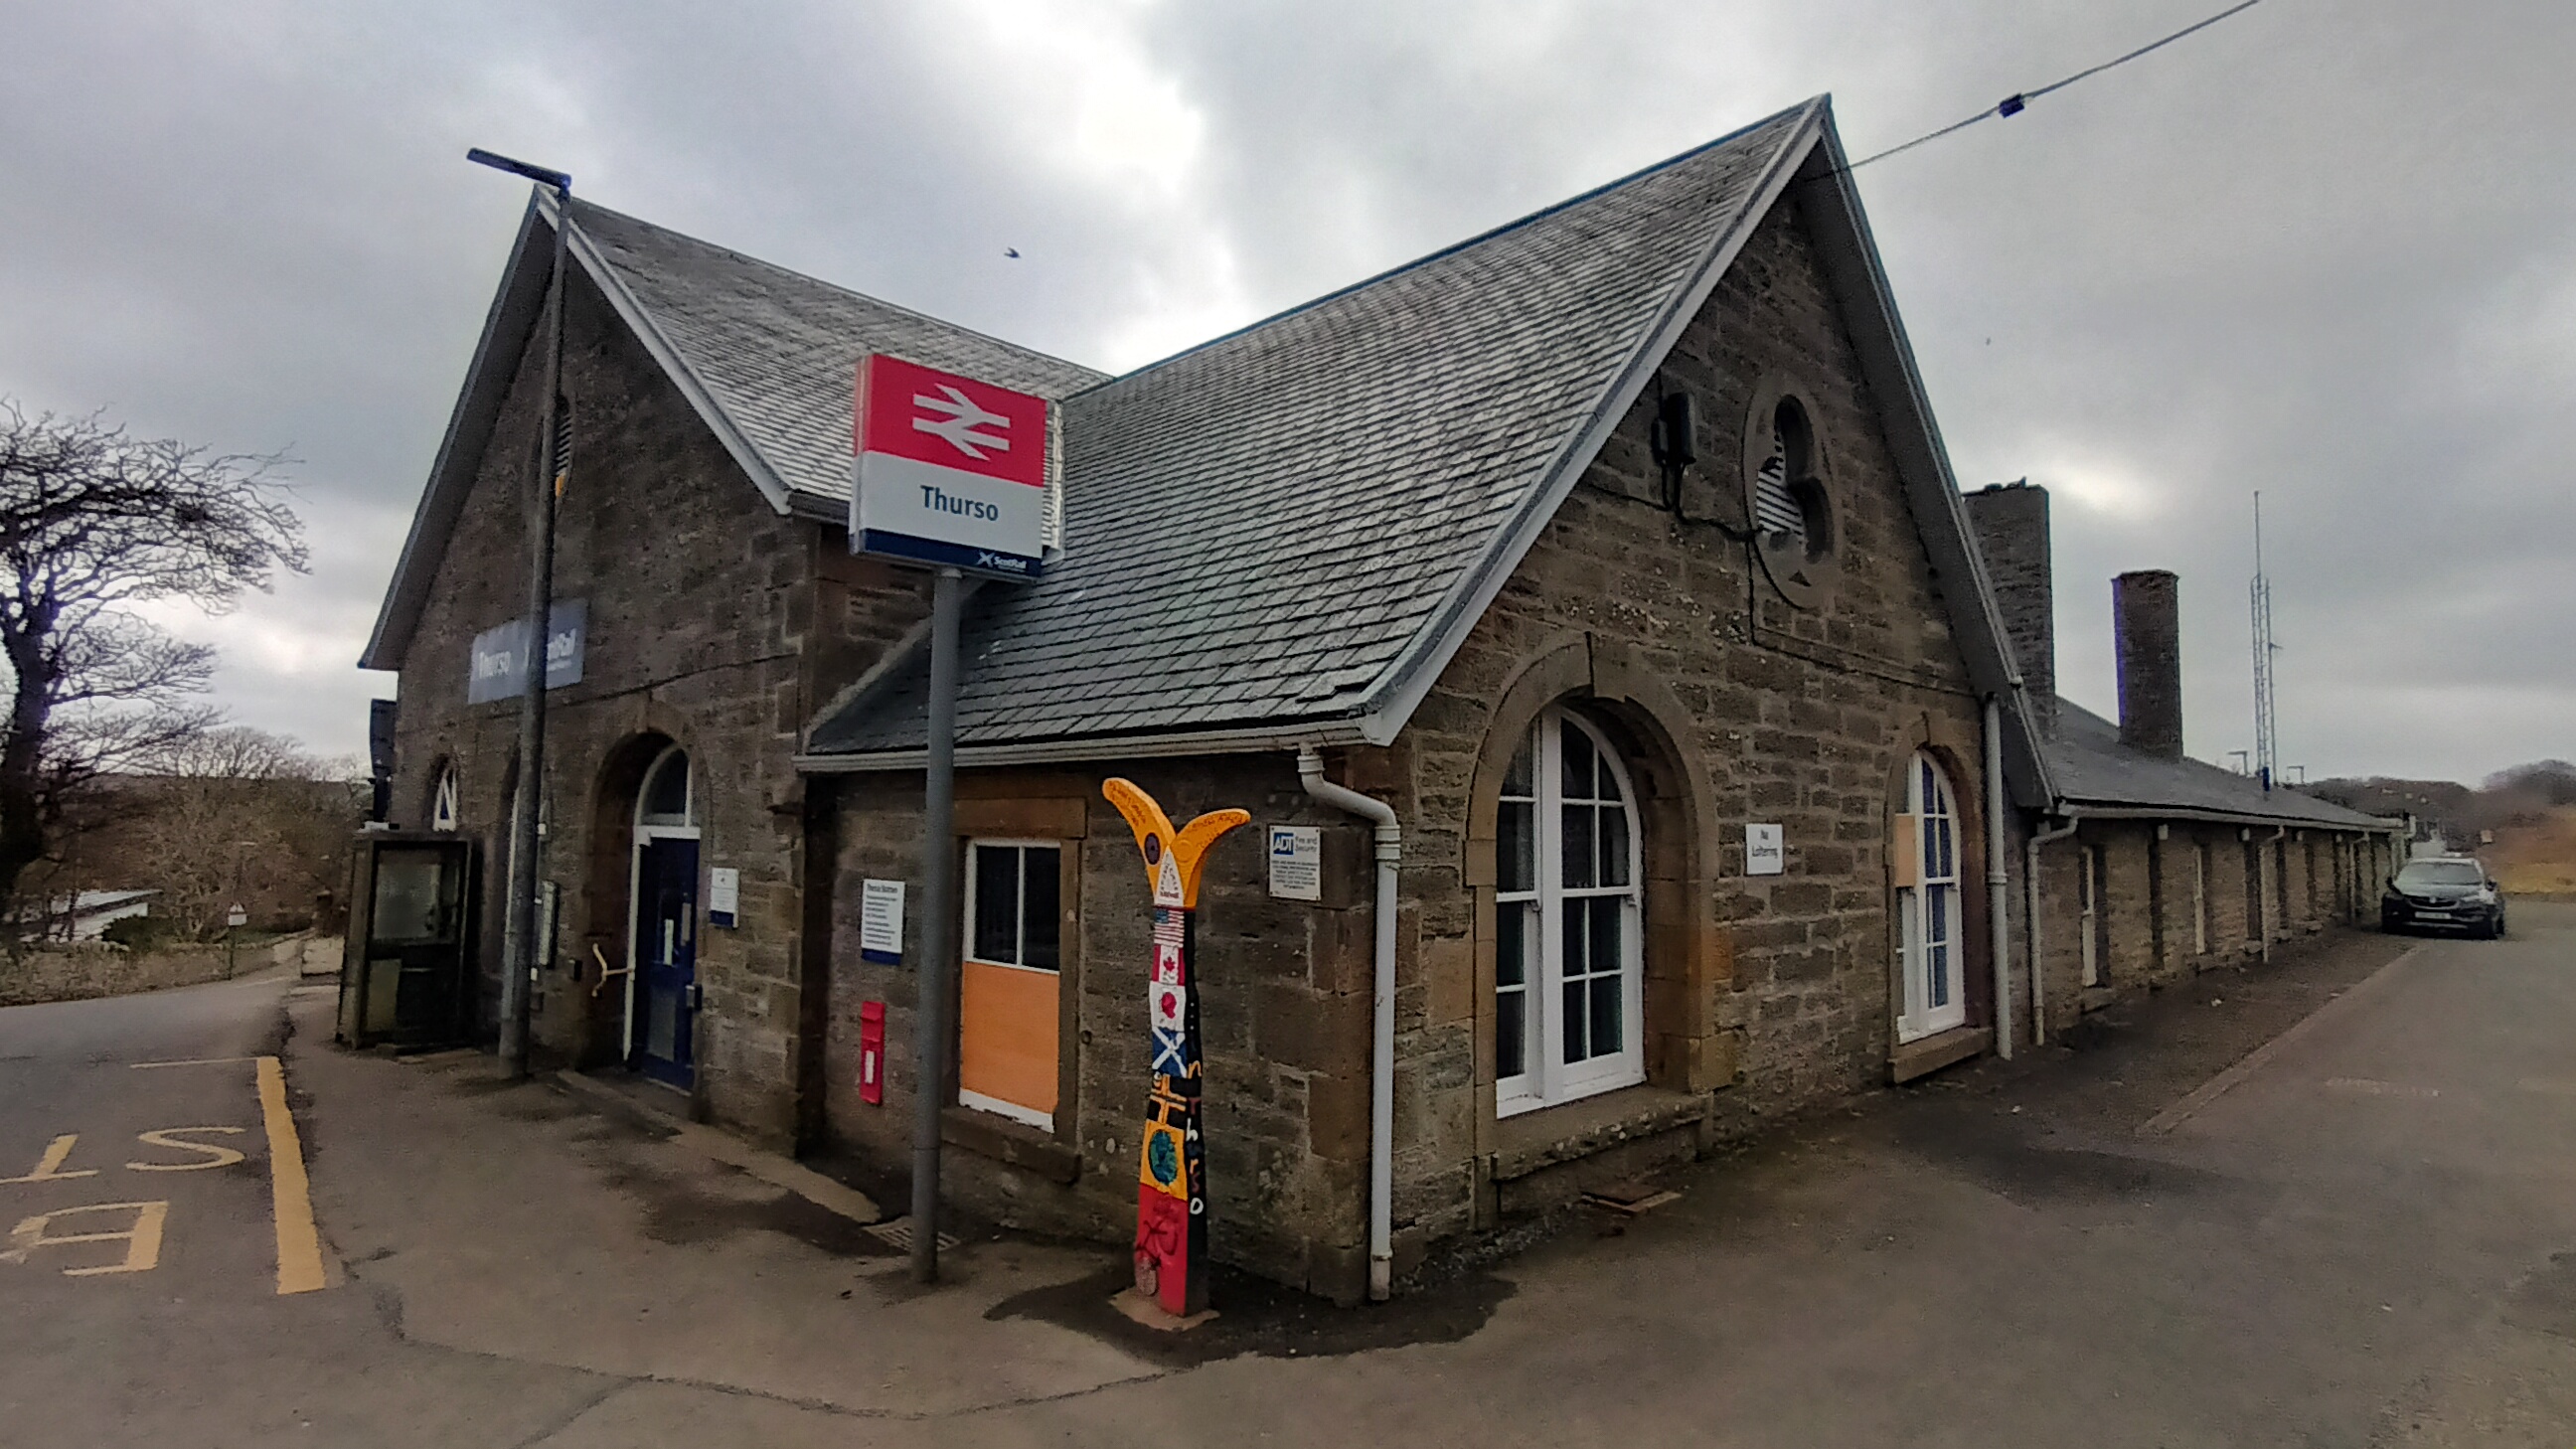 Thurso Station a possible target